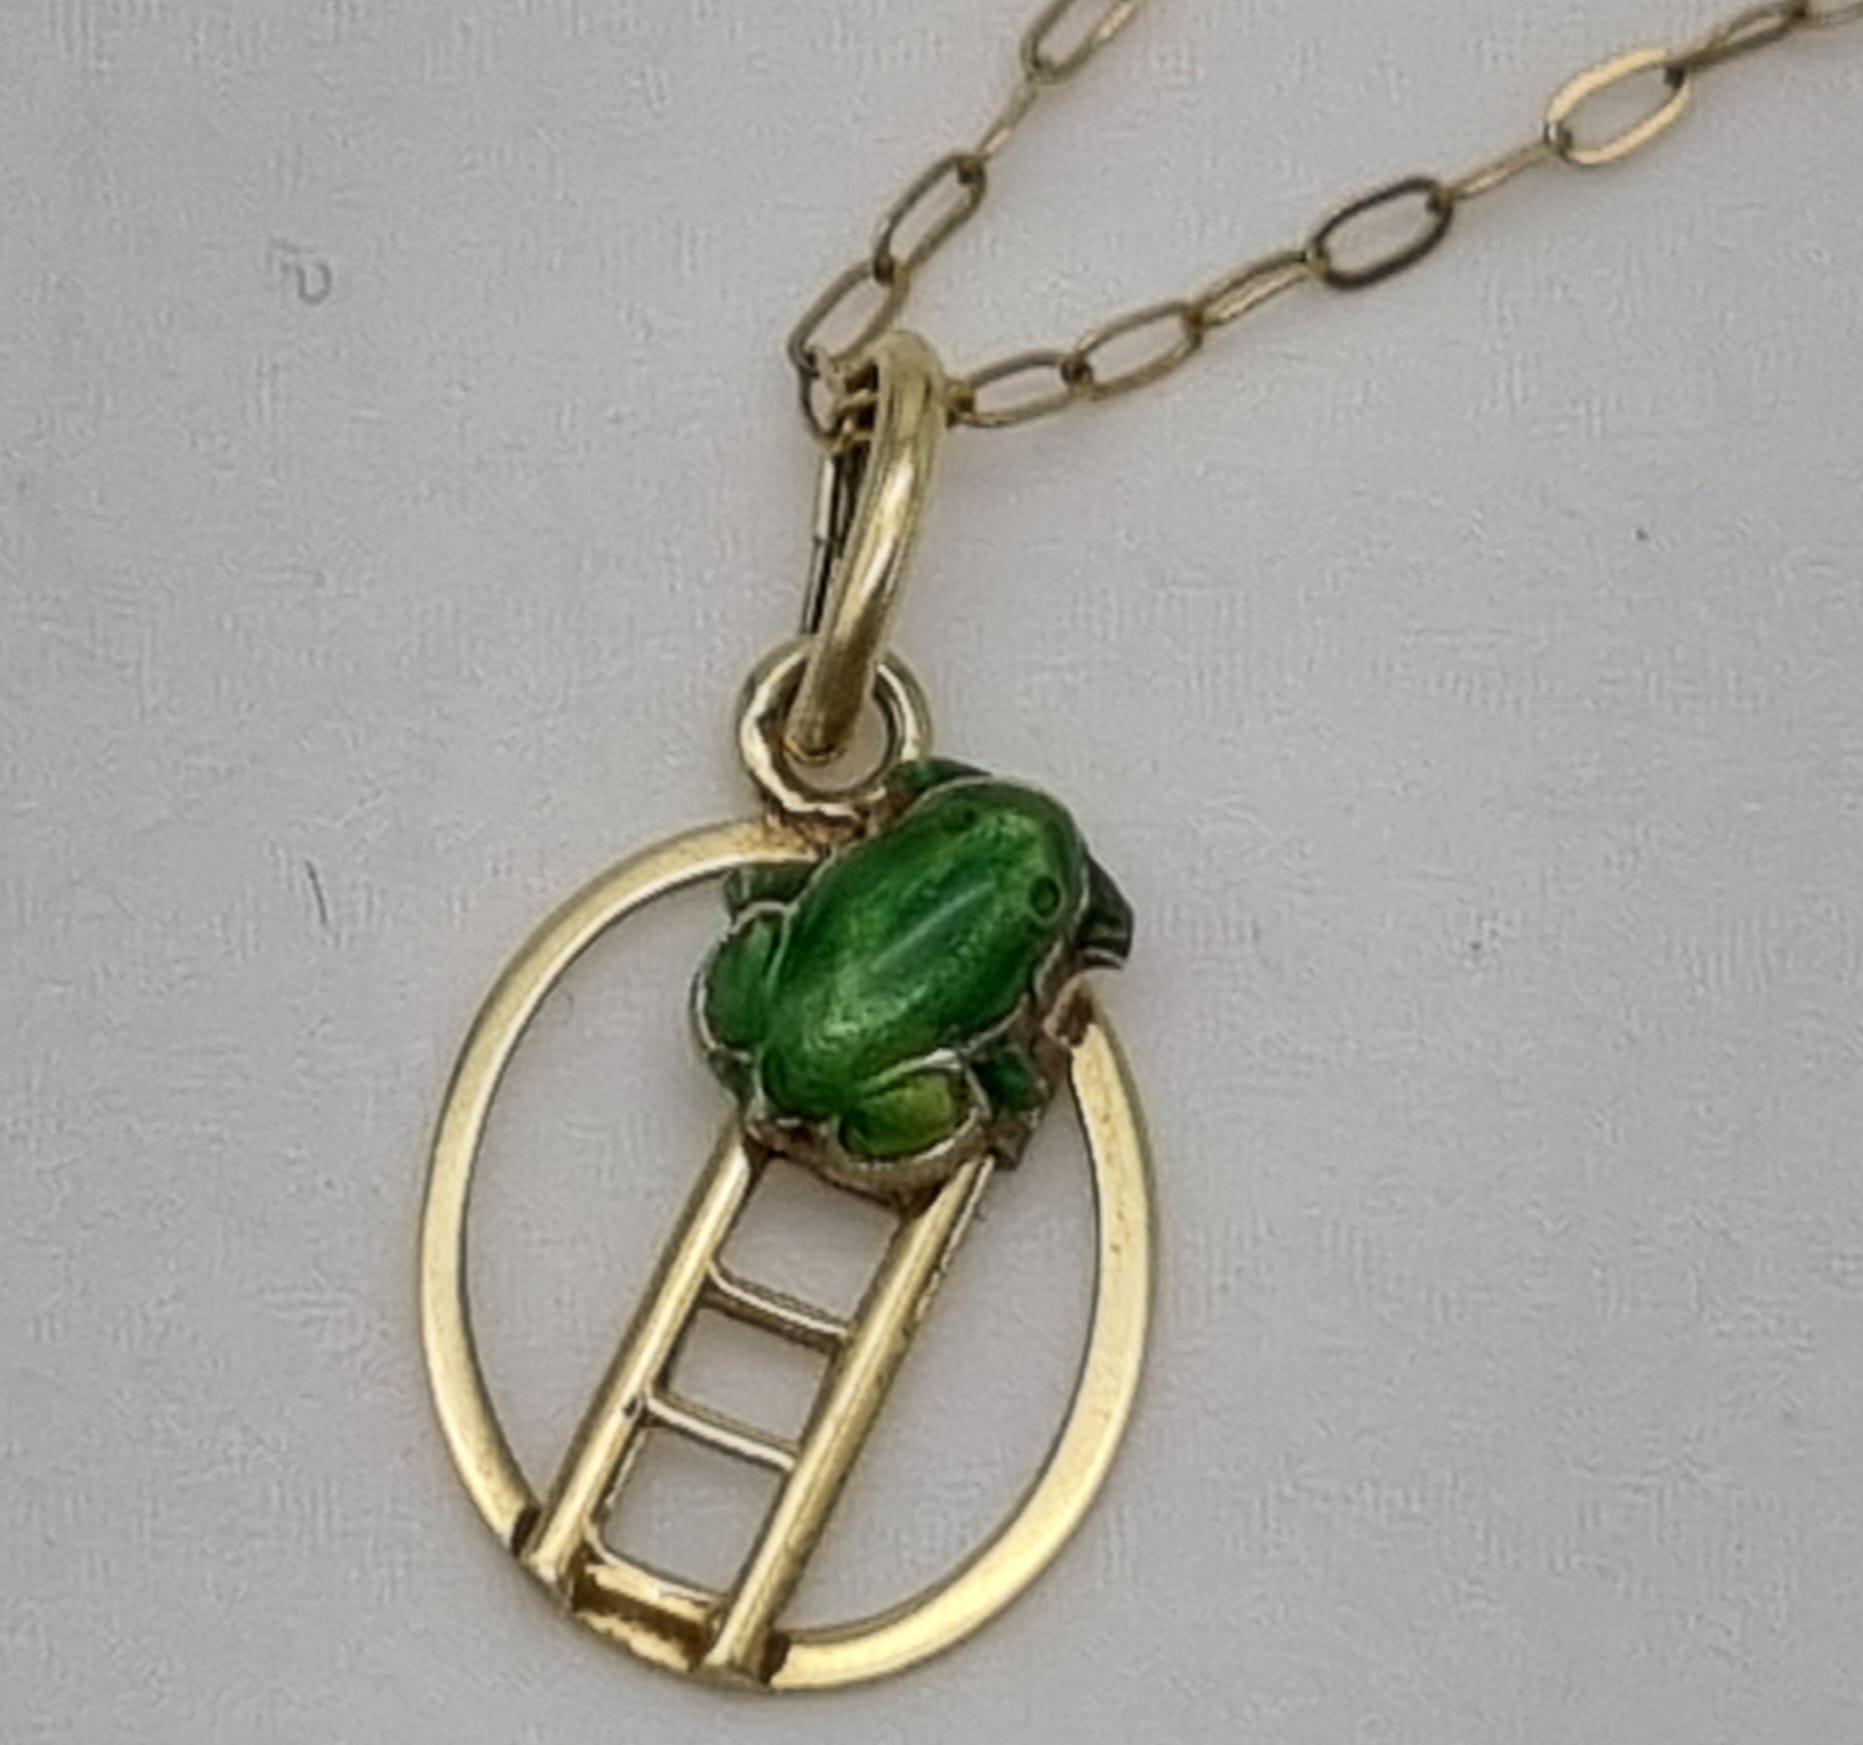 A 9K Yellow Gold Disappearing Necklace with Frog and Ladder Pendant. 44cm. 0.83g - Image 2 of 6